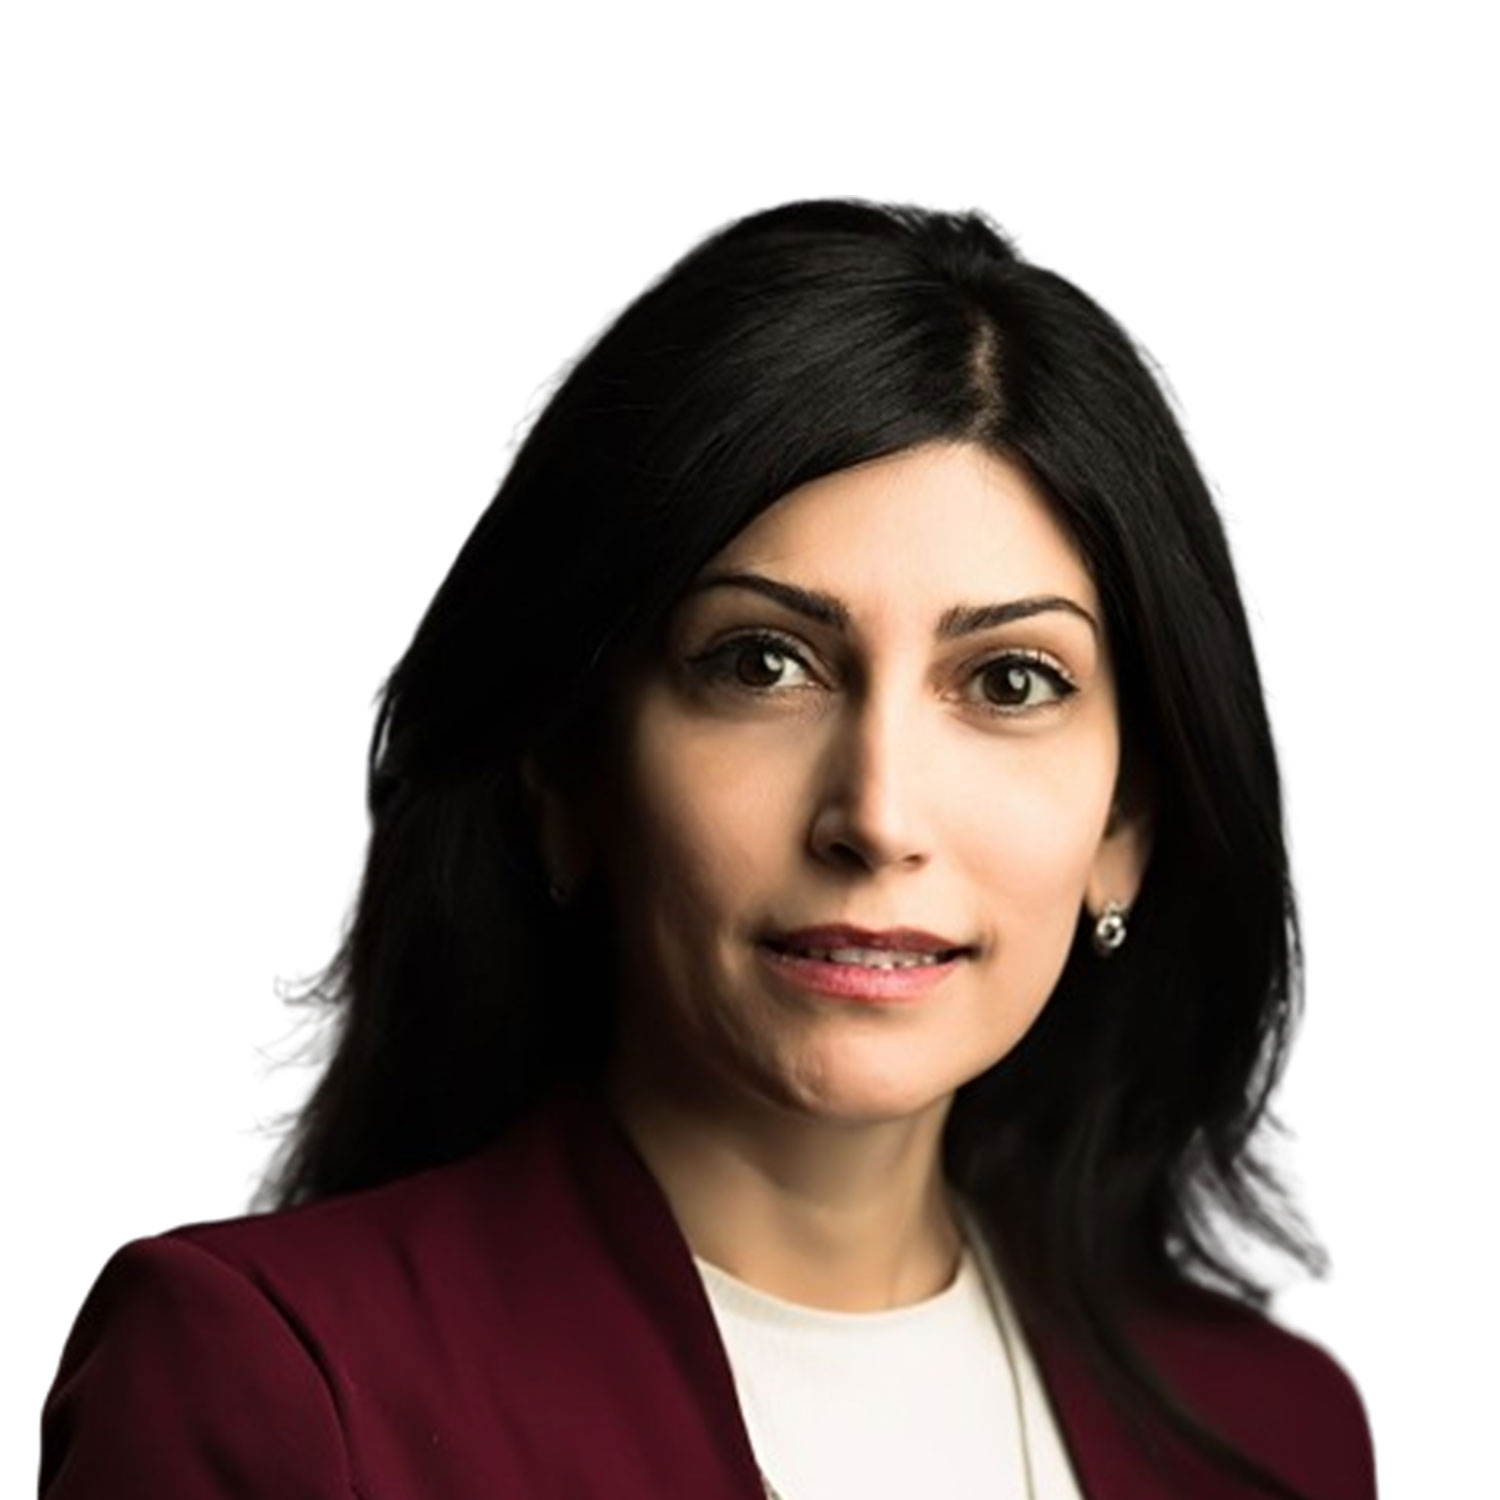 Anahita Rabii, Ph.D.-Global cleantech business directory team member speaker Renewable Energy Green Chemistry Natural Resources New approaches to municipal waste minimization, renewable energy utilization, and carbon footprint reduction